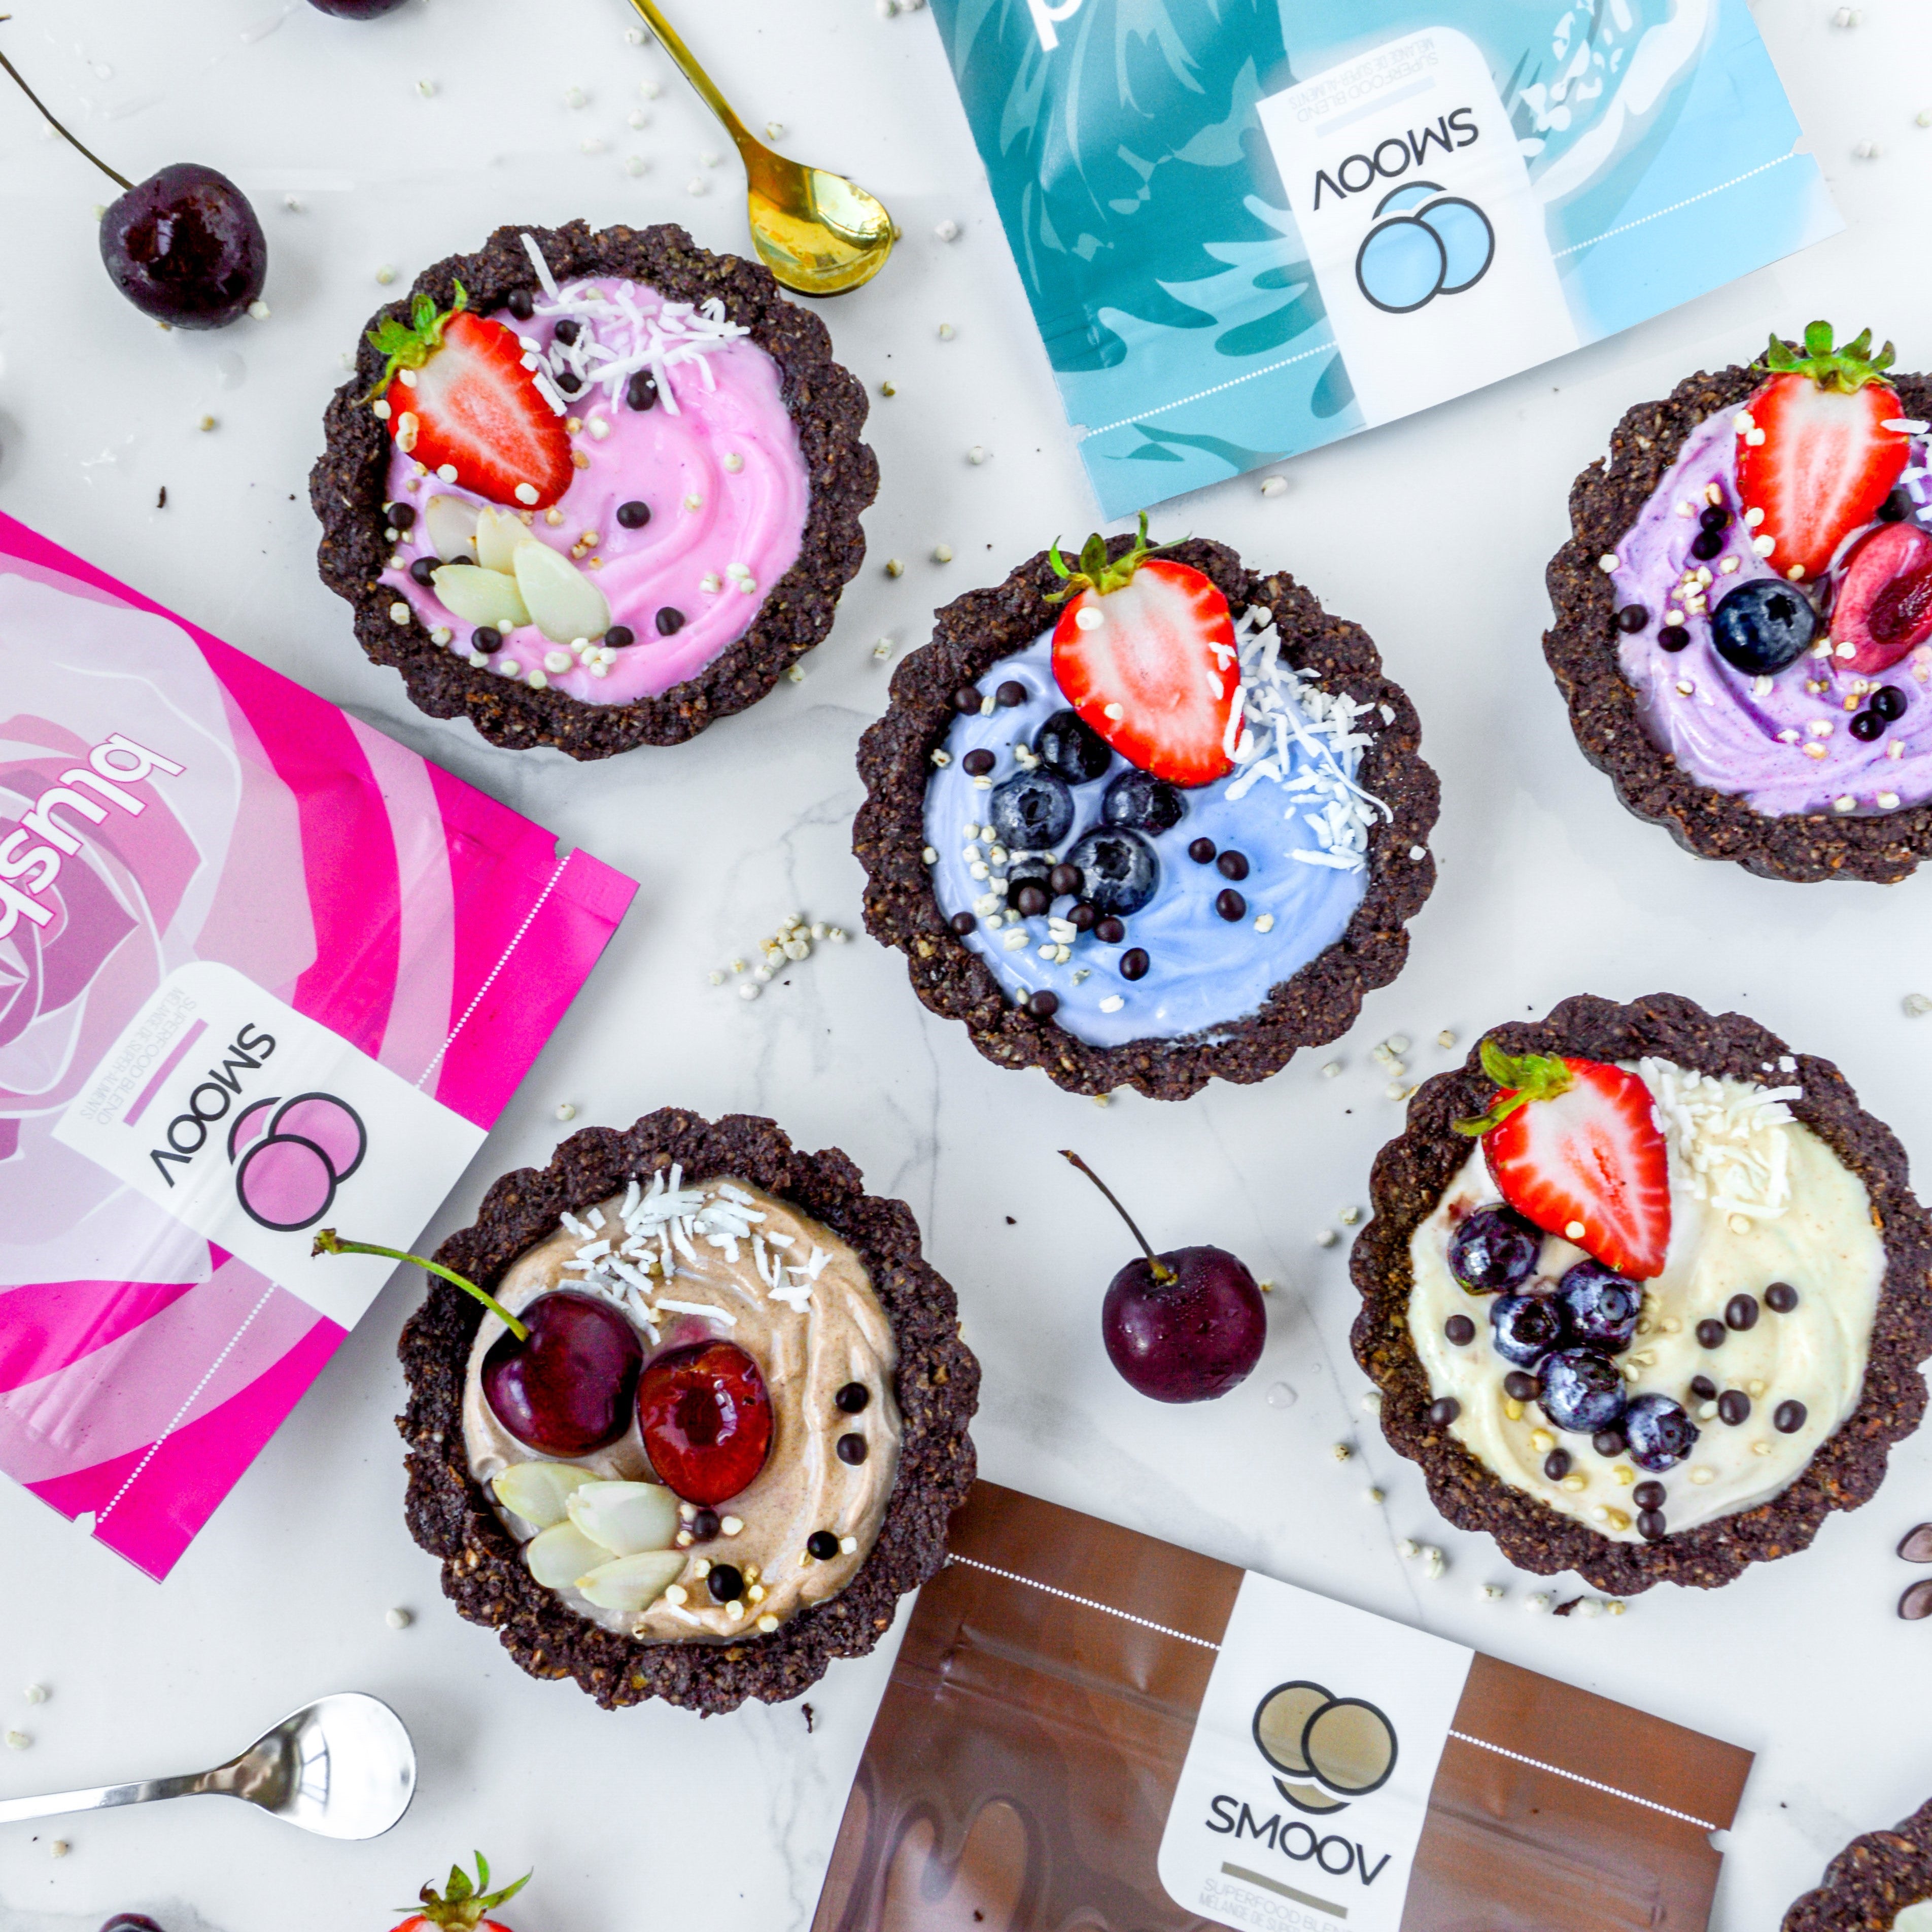 Energizing yogurt tarts made using SMOOV euphoric blend. Raw cacao, carob, maca, lucuma for a mood boost and destress to satisfy cravings in a healthy way.